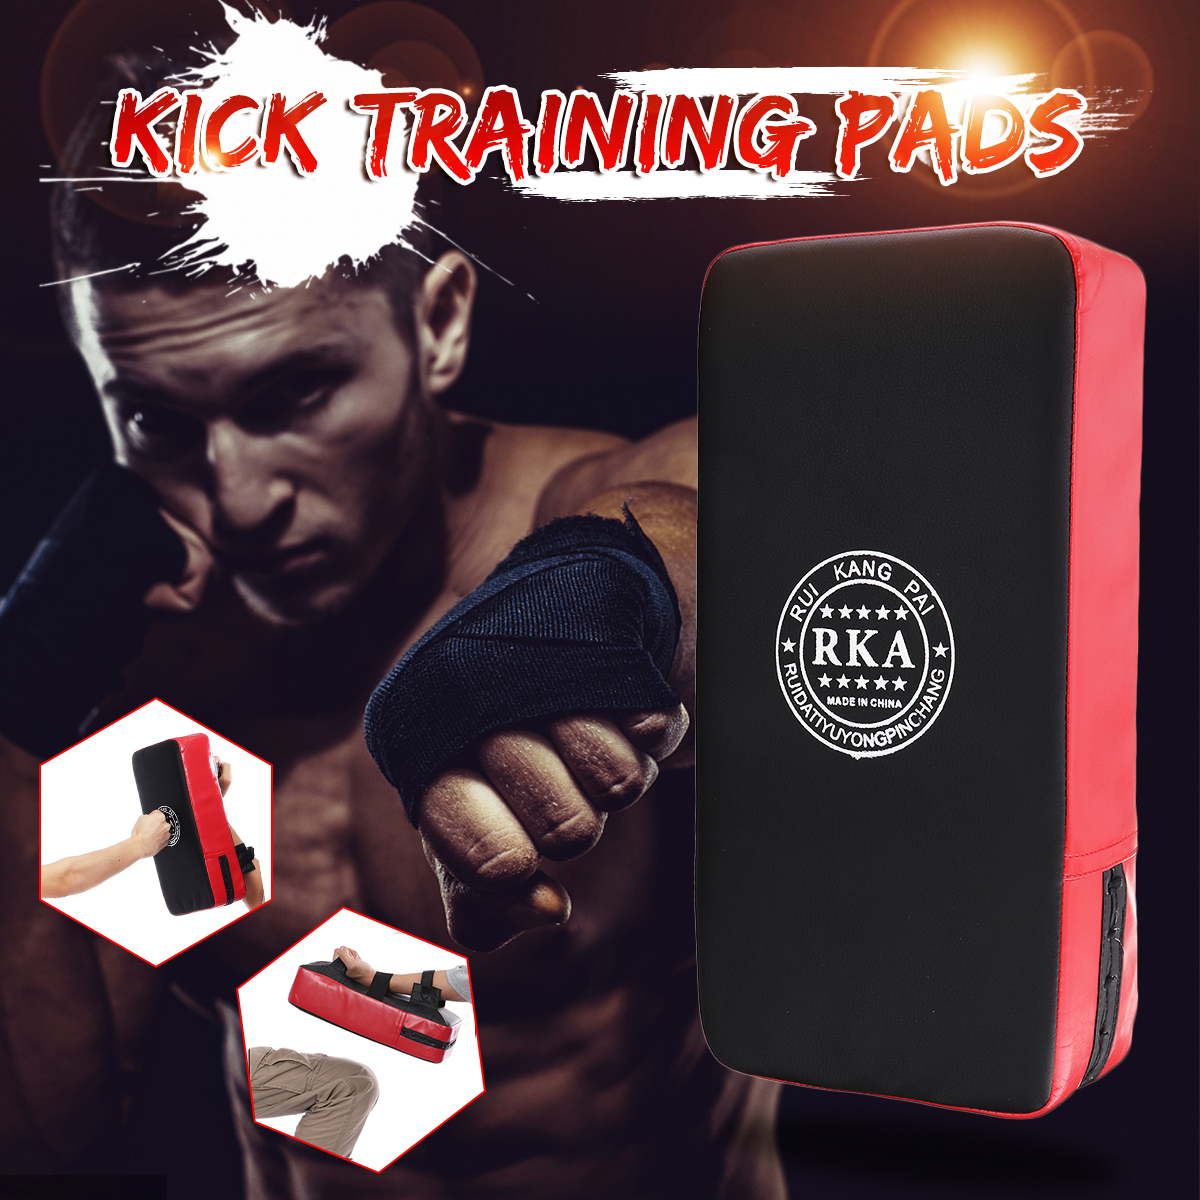 PU-Leather-Kick-Training-Boxing-Training-Target-PU-Leather-Earthquake-resistant-Curved-Fitness-Boxin-1791752-1